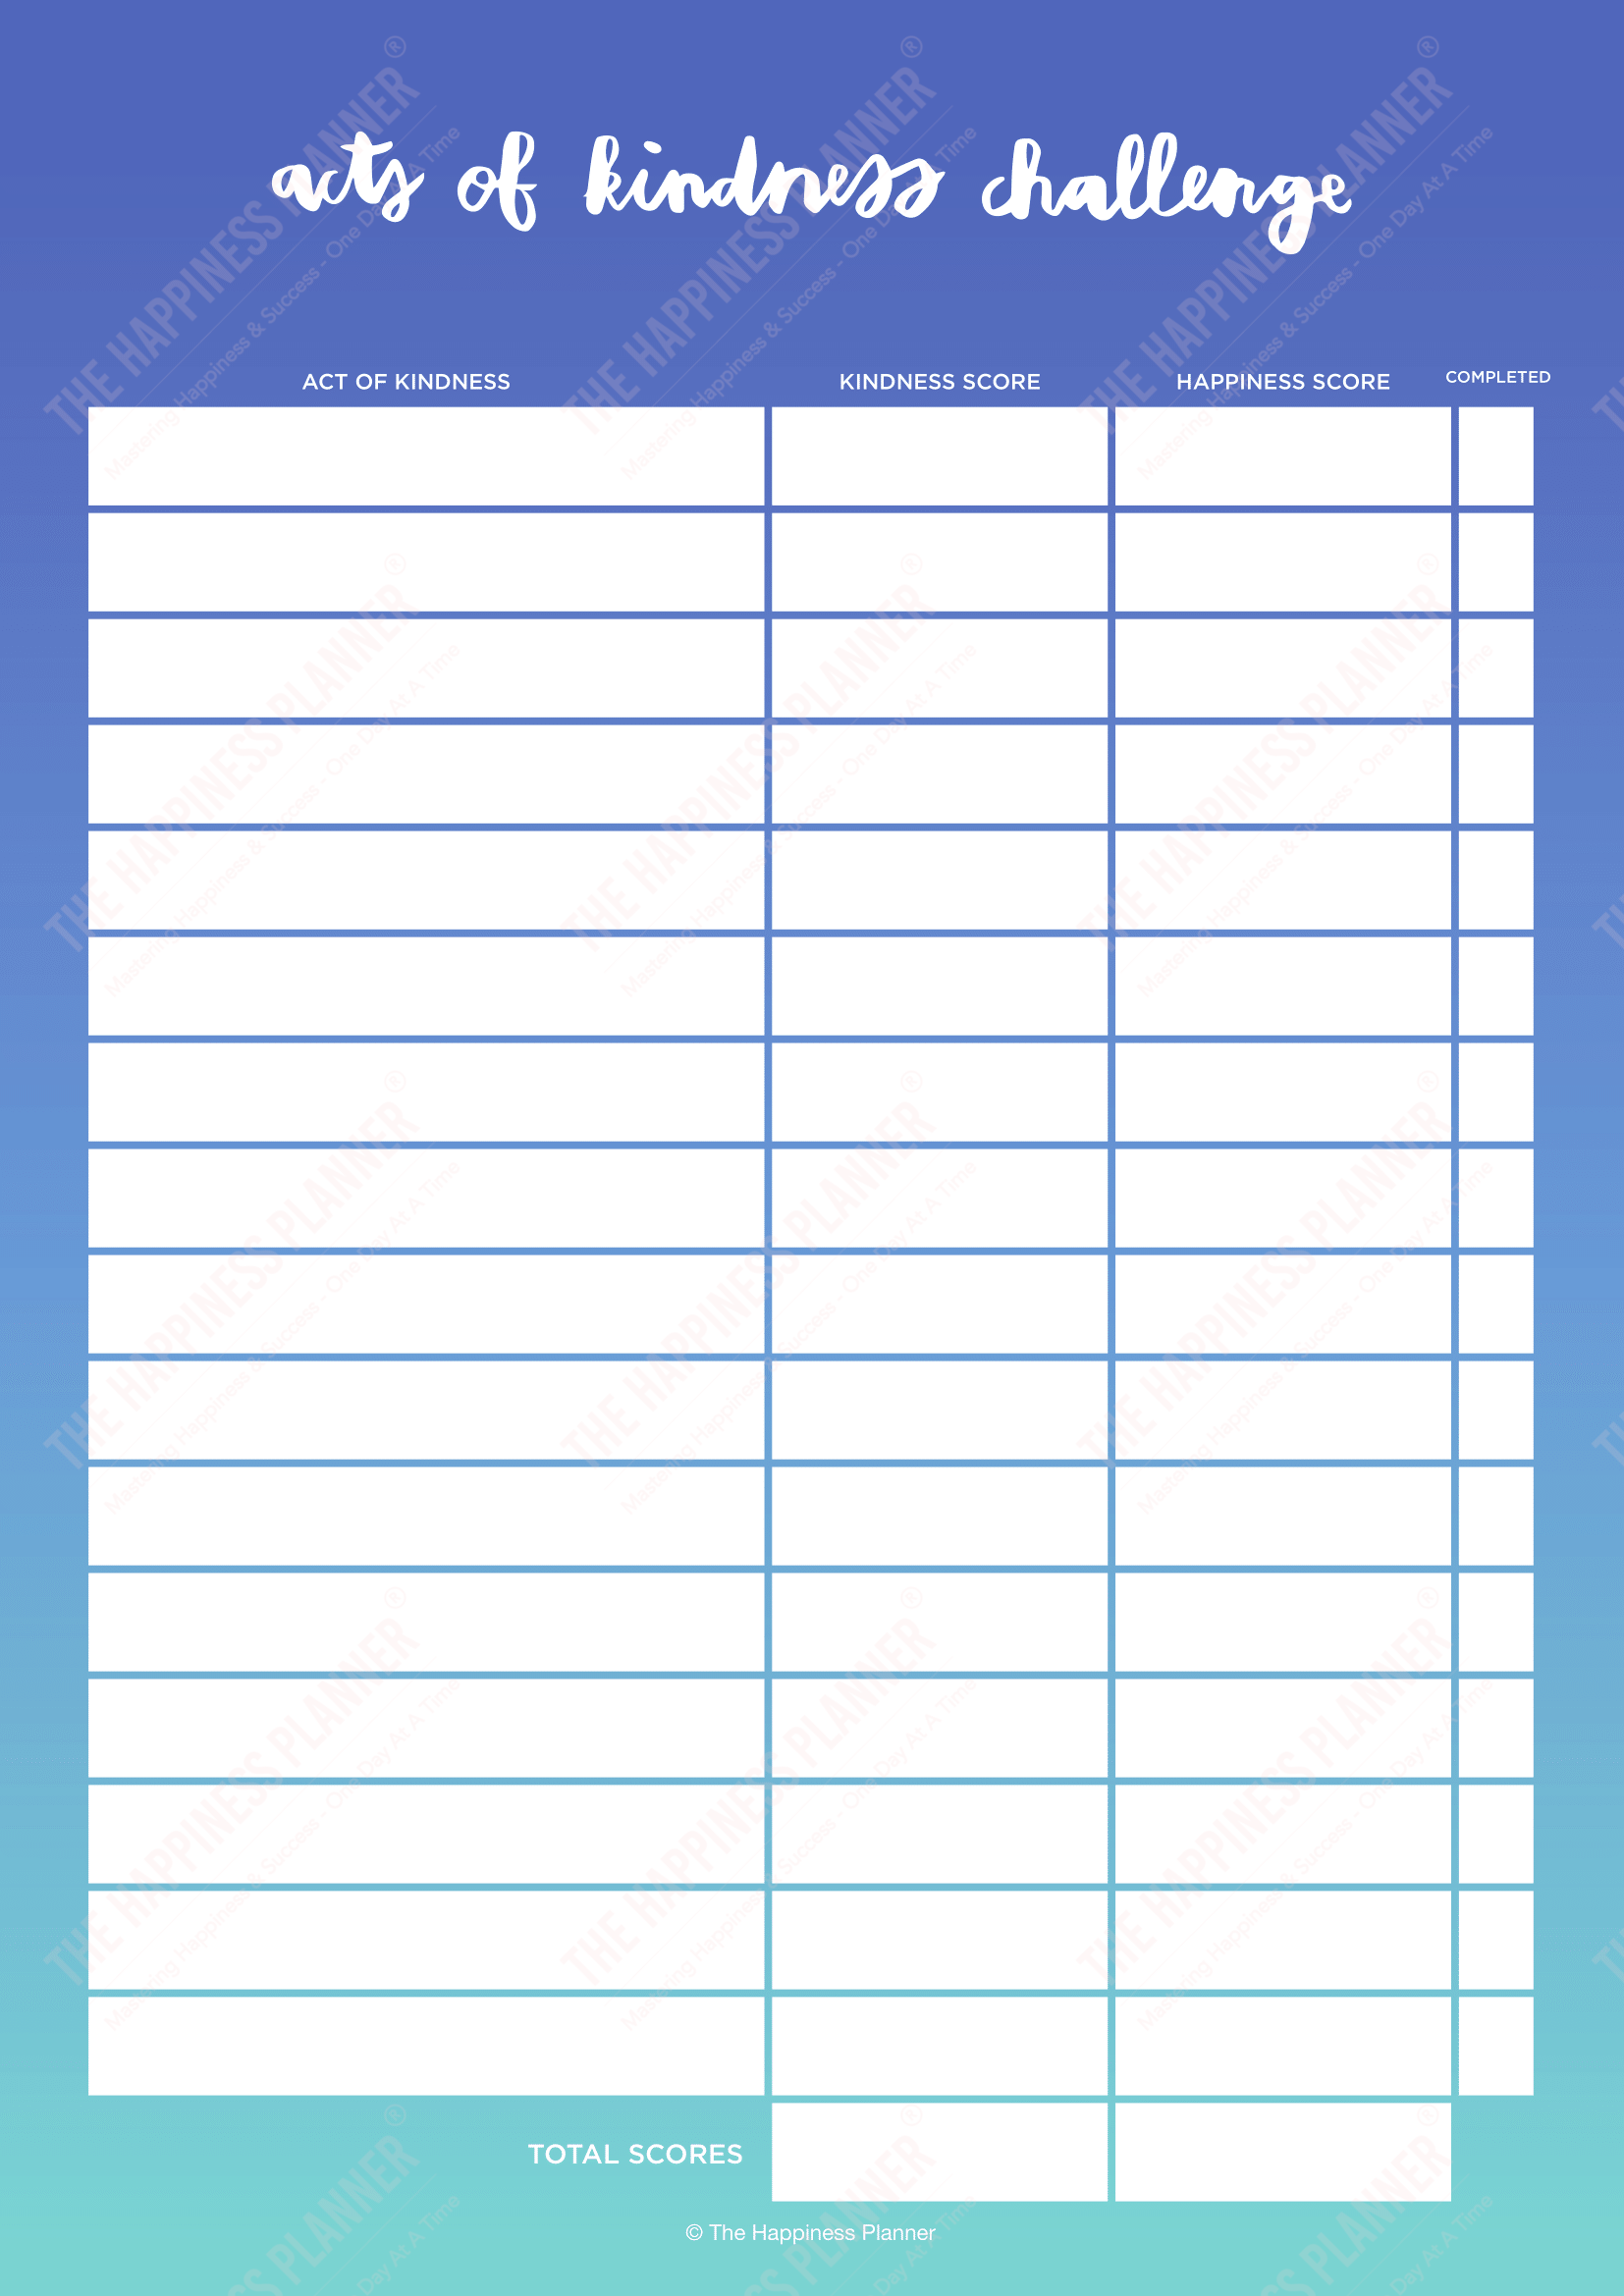 Premium Printables: #Kindness - The Happiness Planner®